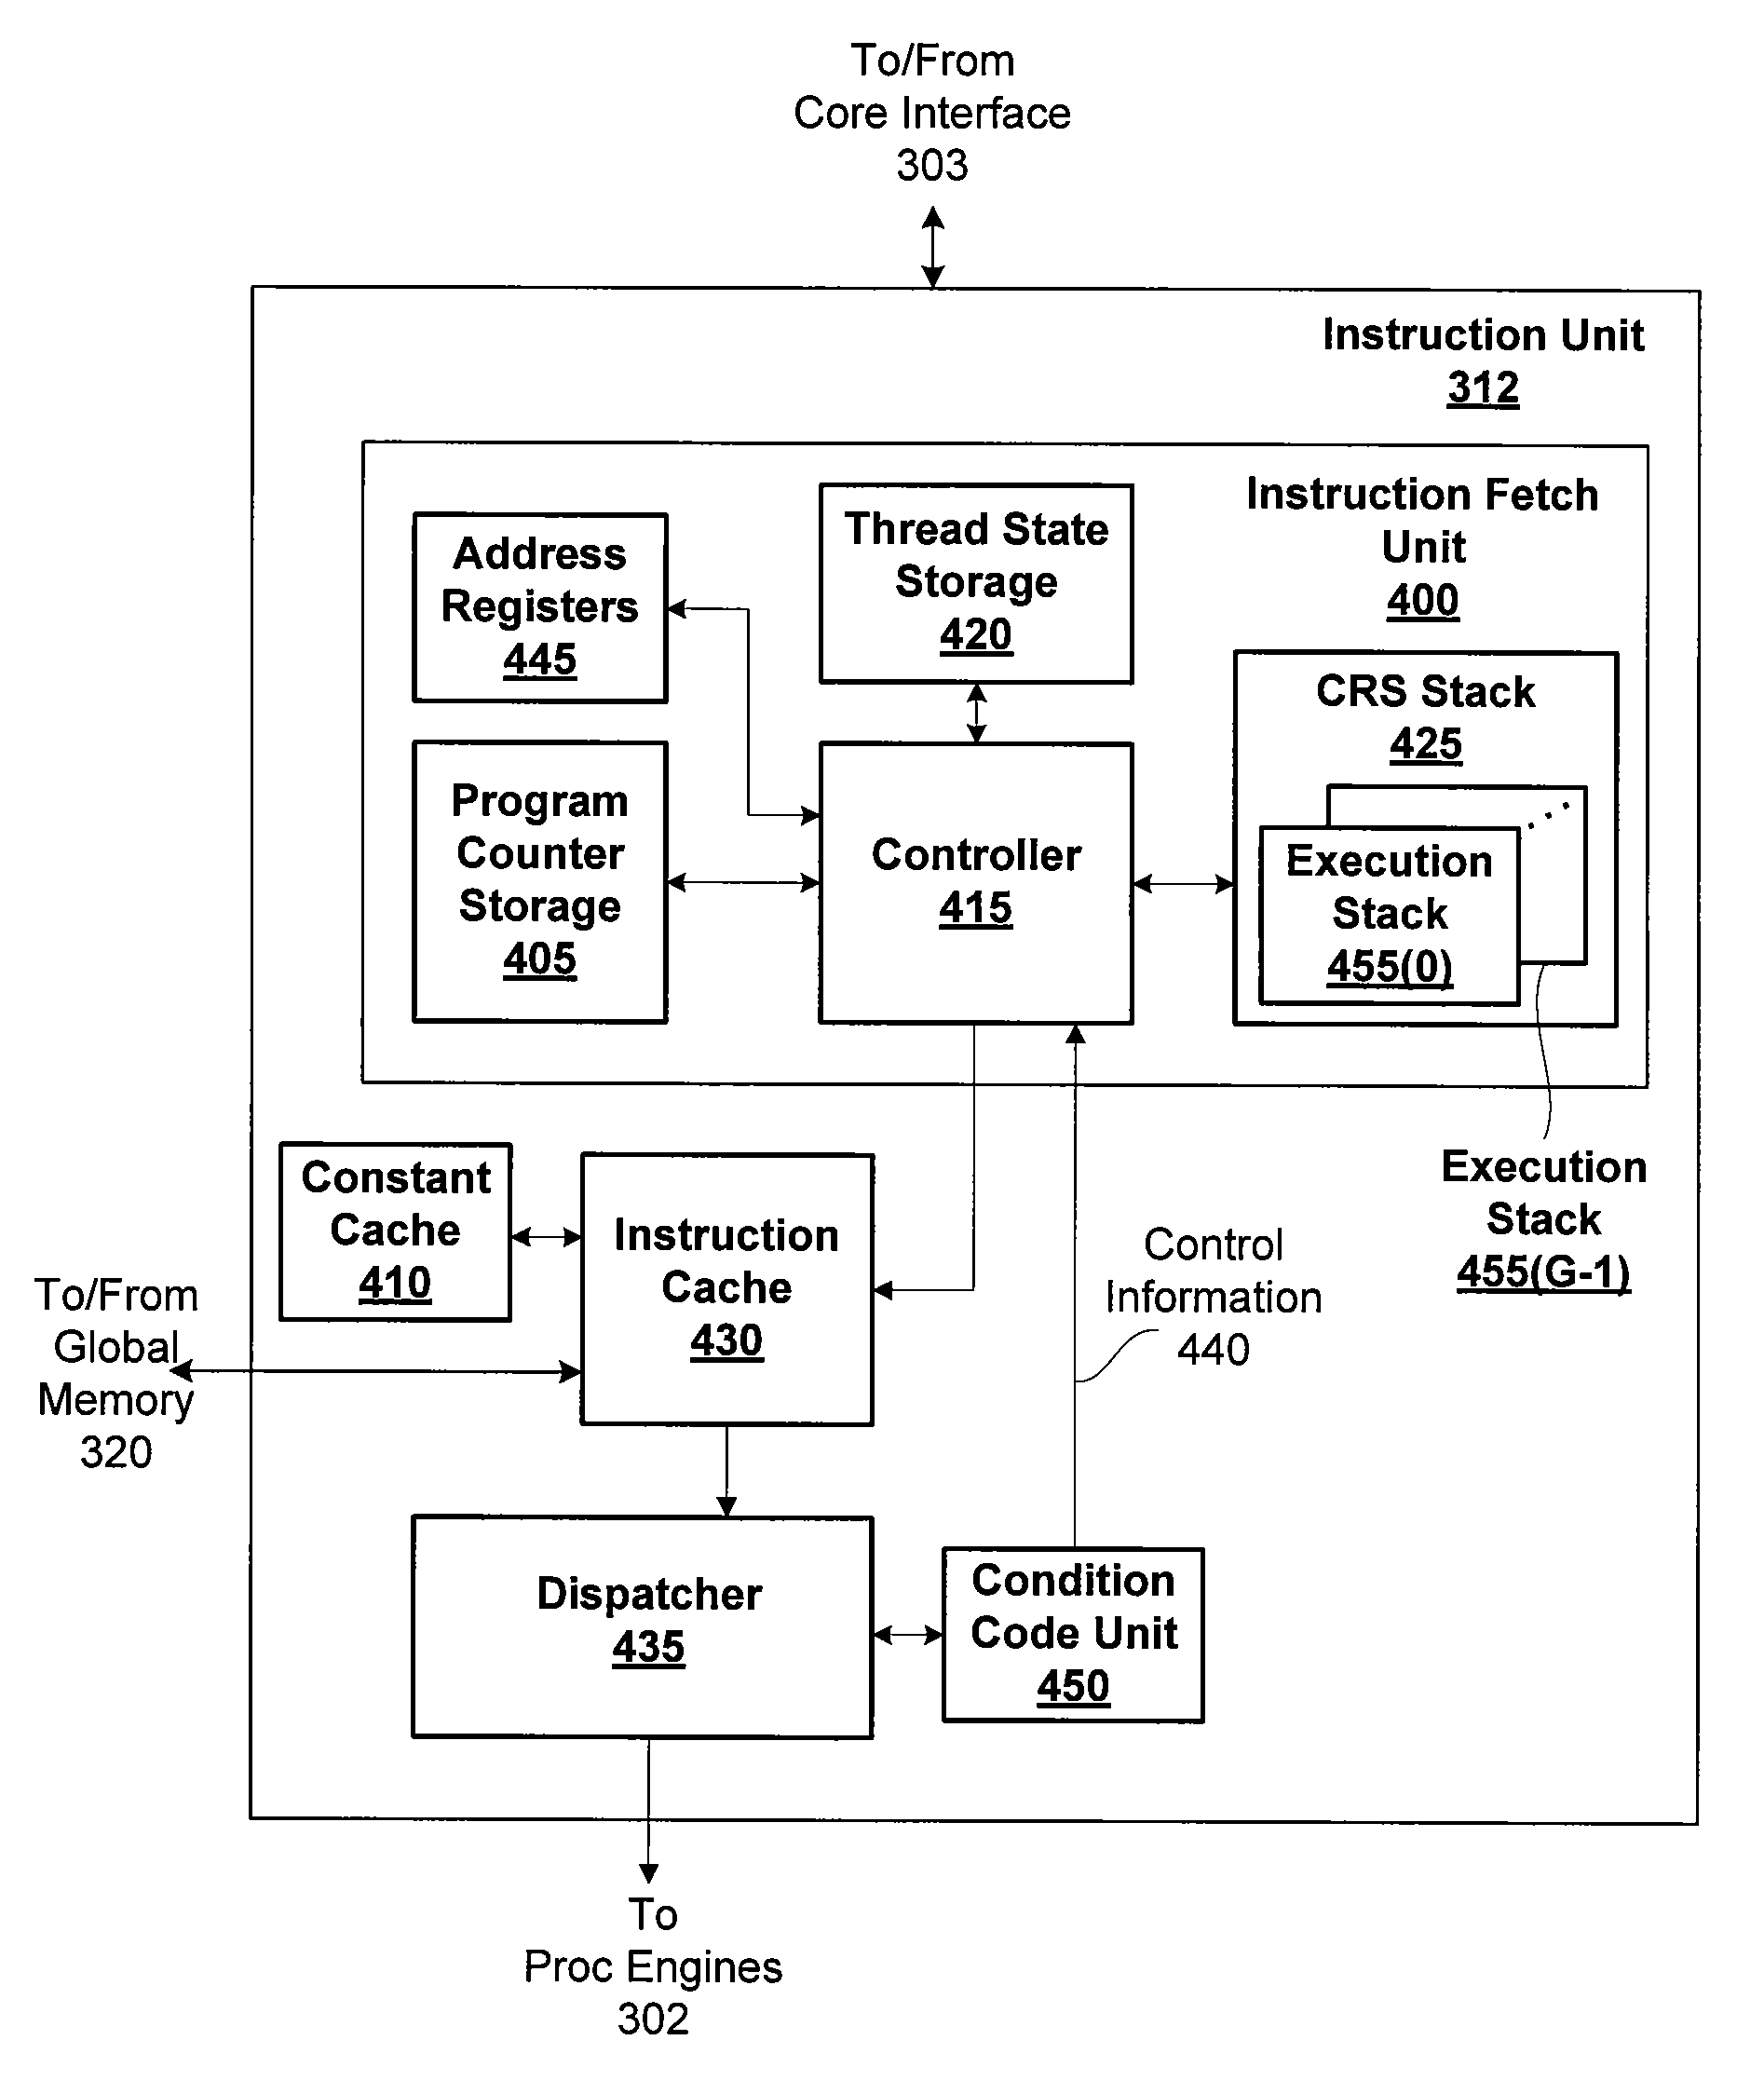 Indirect function call instructions in a synchronous parallel thread processor